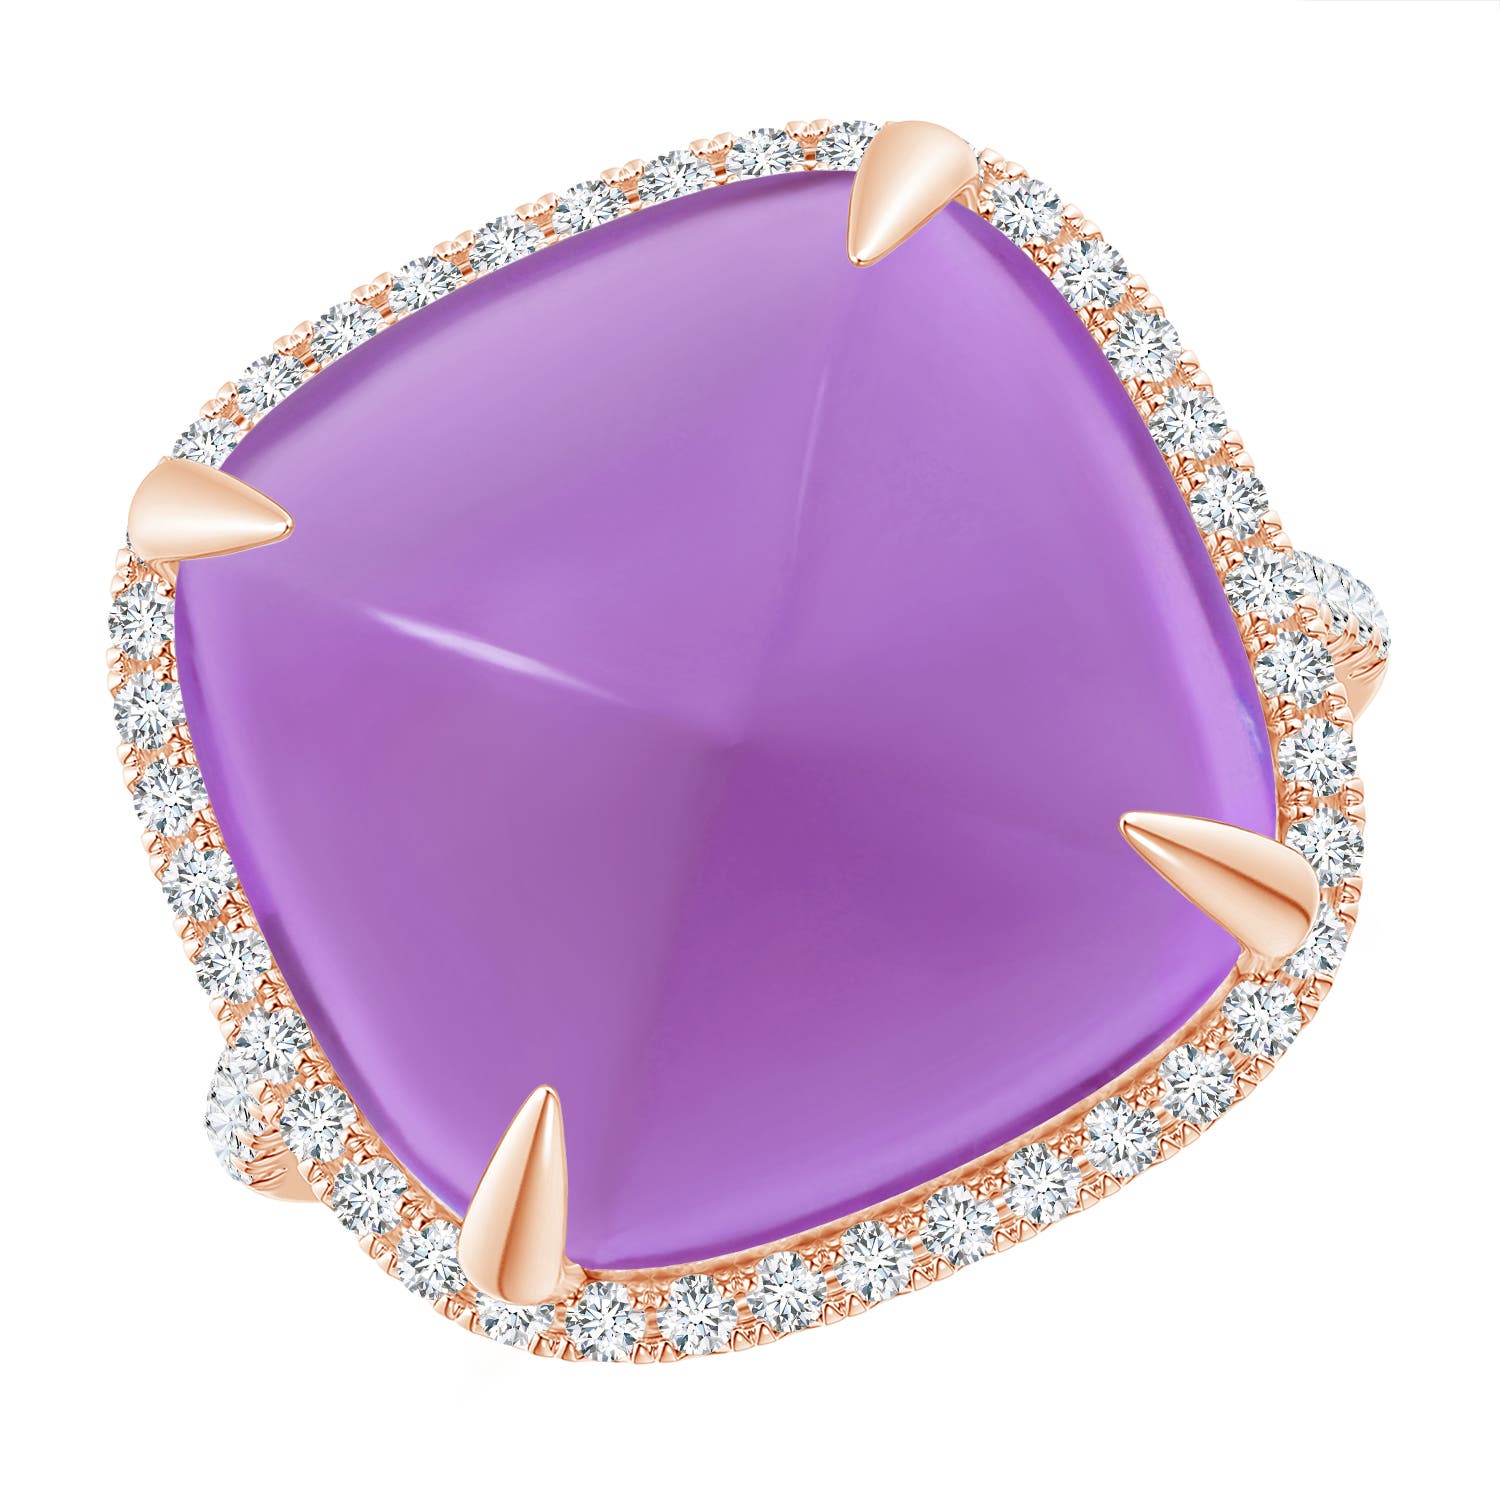 AA - Amethyst / 16.02 CT / 14 KT Rose Gold